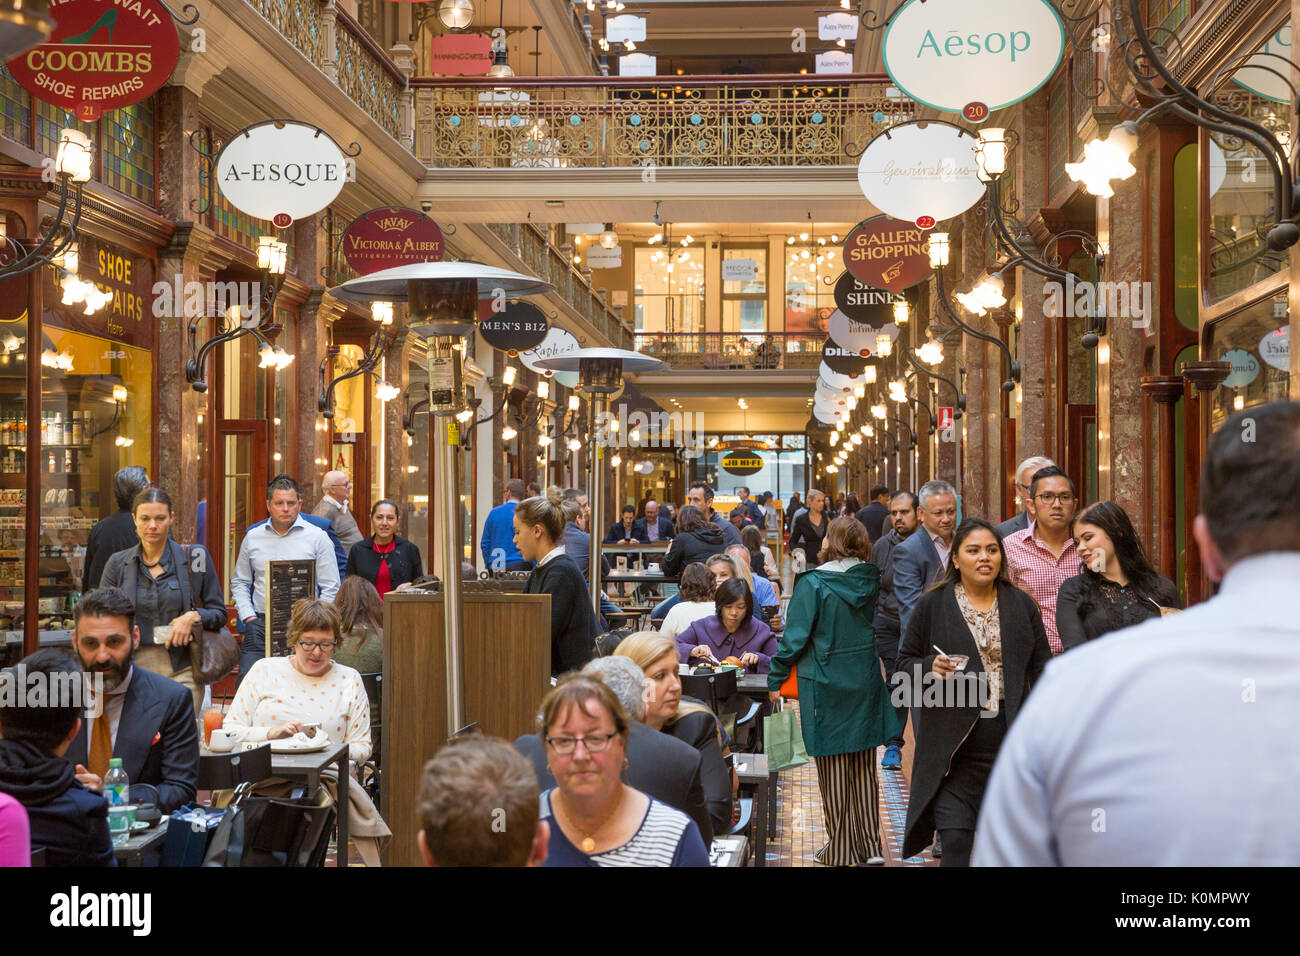 The Strand Arcade built in 1891 is Sydney's only remaining Victorian retail arcade, located in the city centre, with upmarket shops and stores Stock Photo